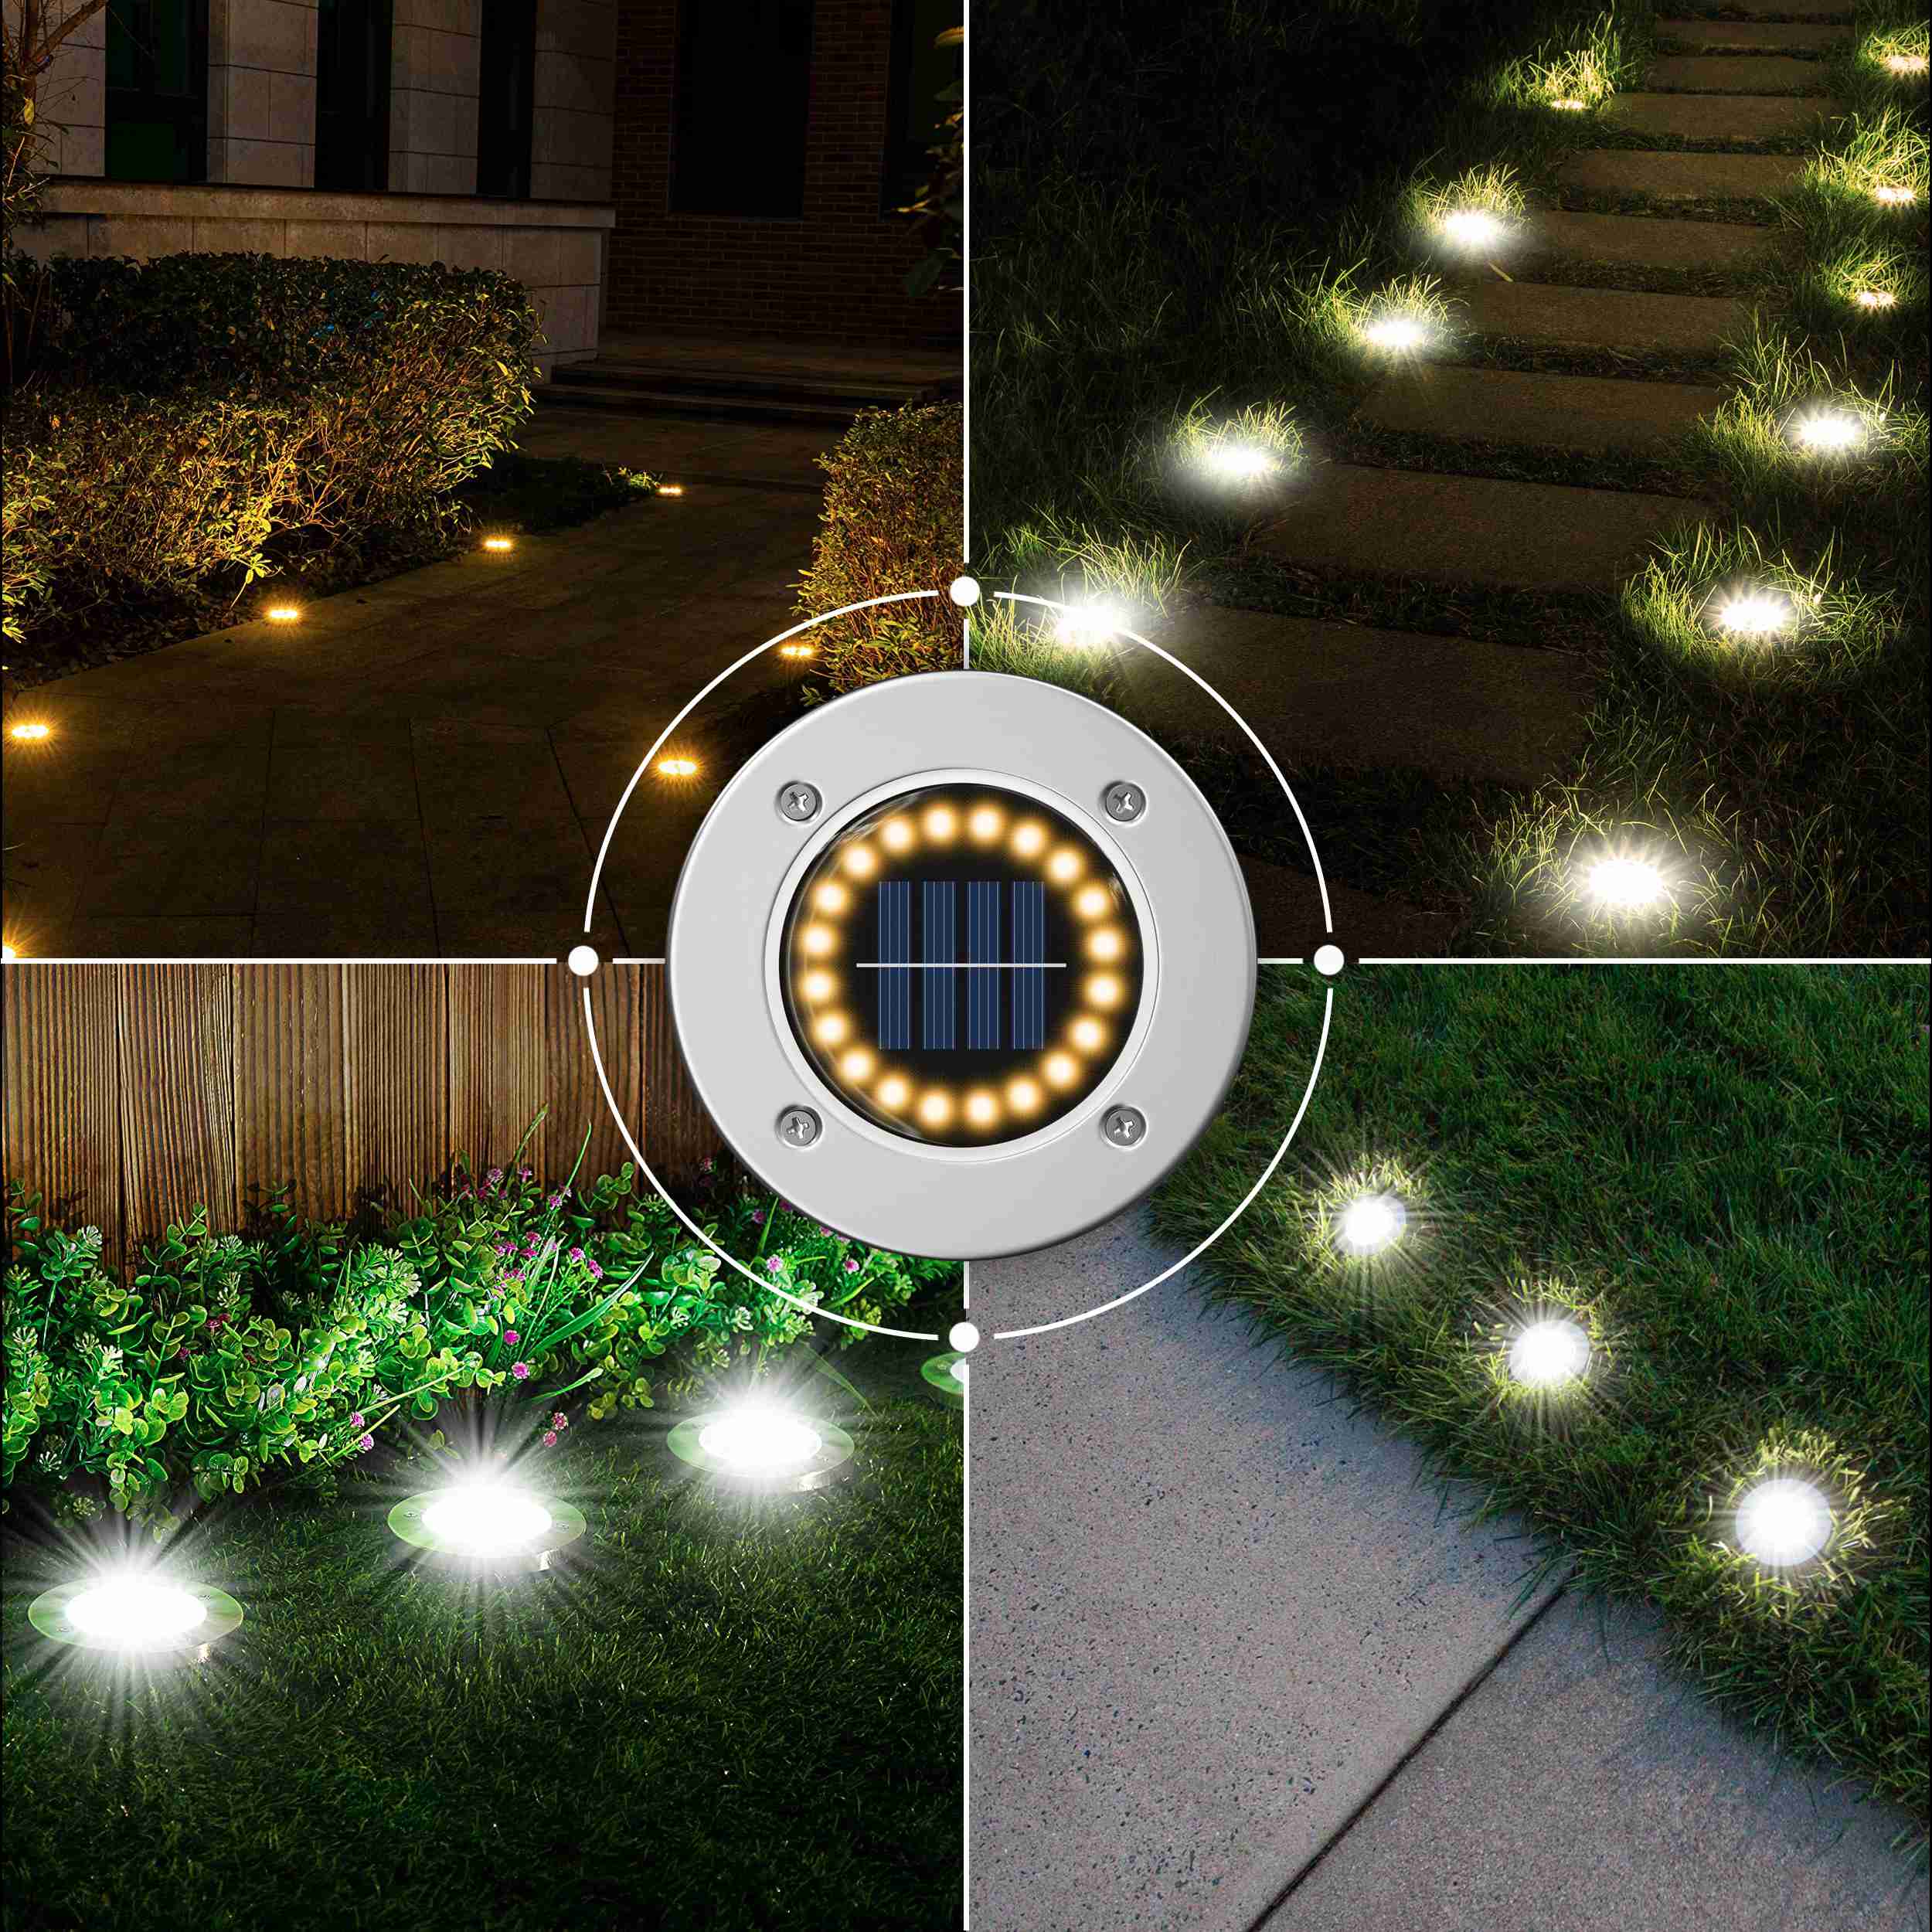 solarsy-outdoor-sola-lights-ground-lights-solar-path-pathway with discount code